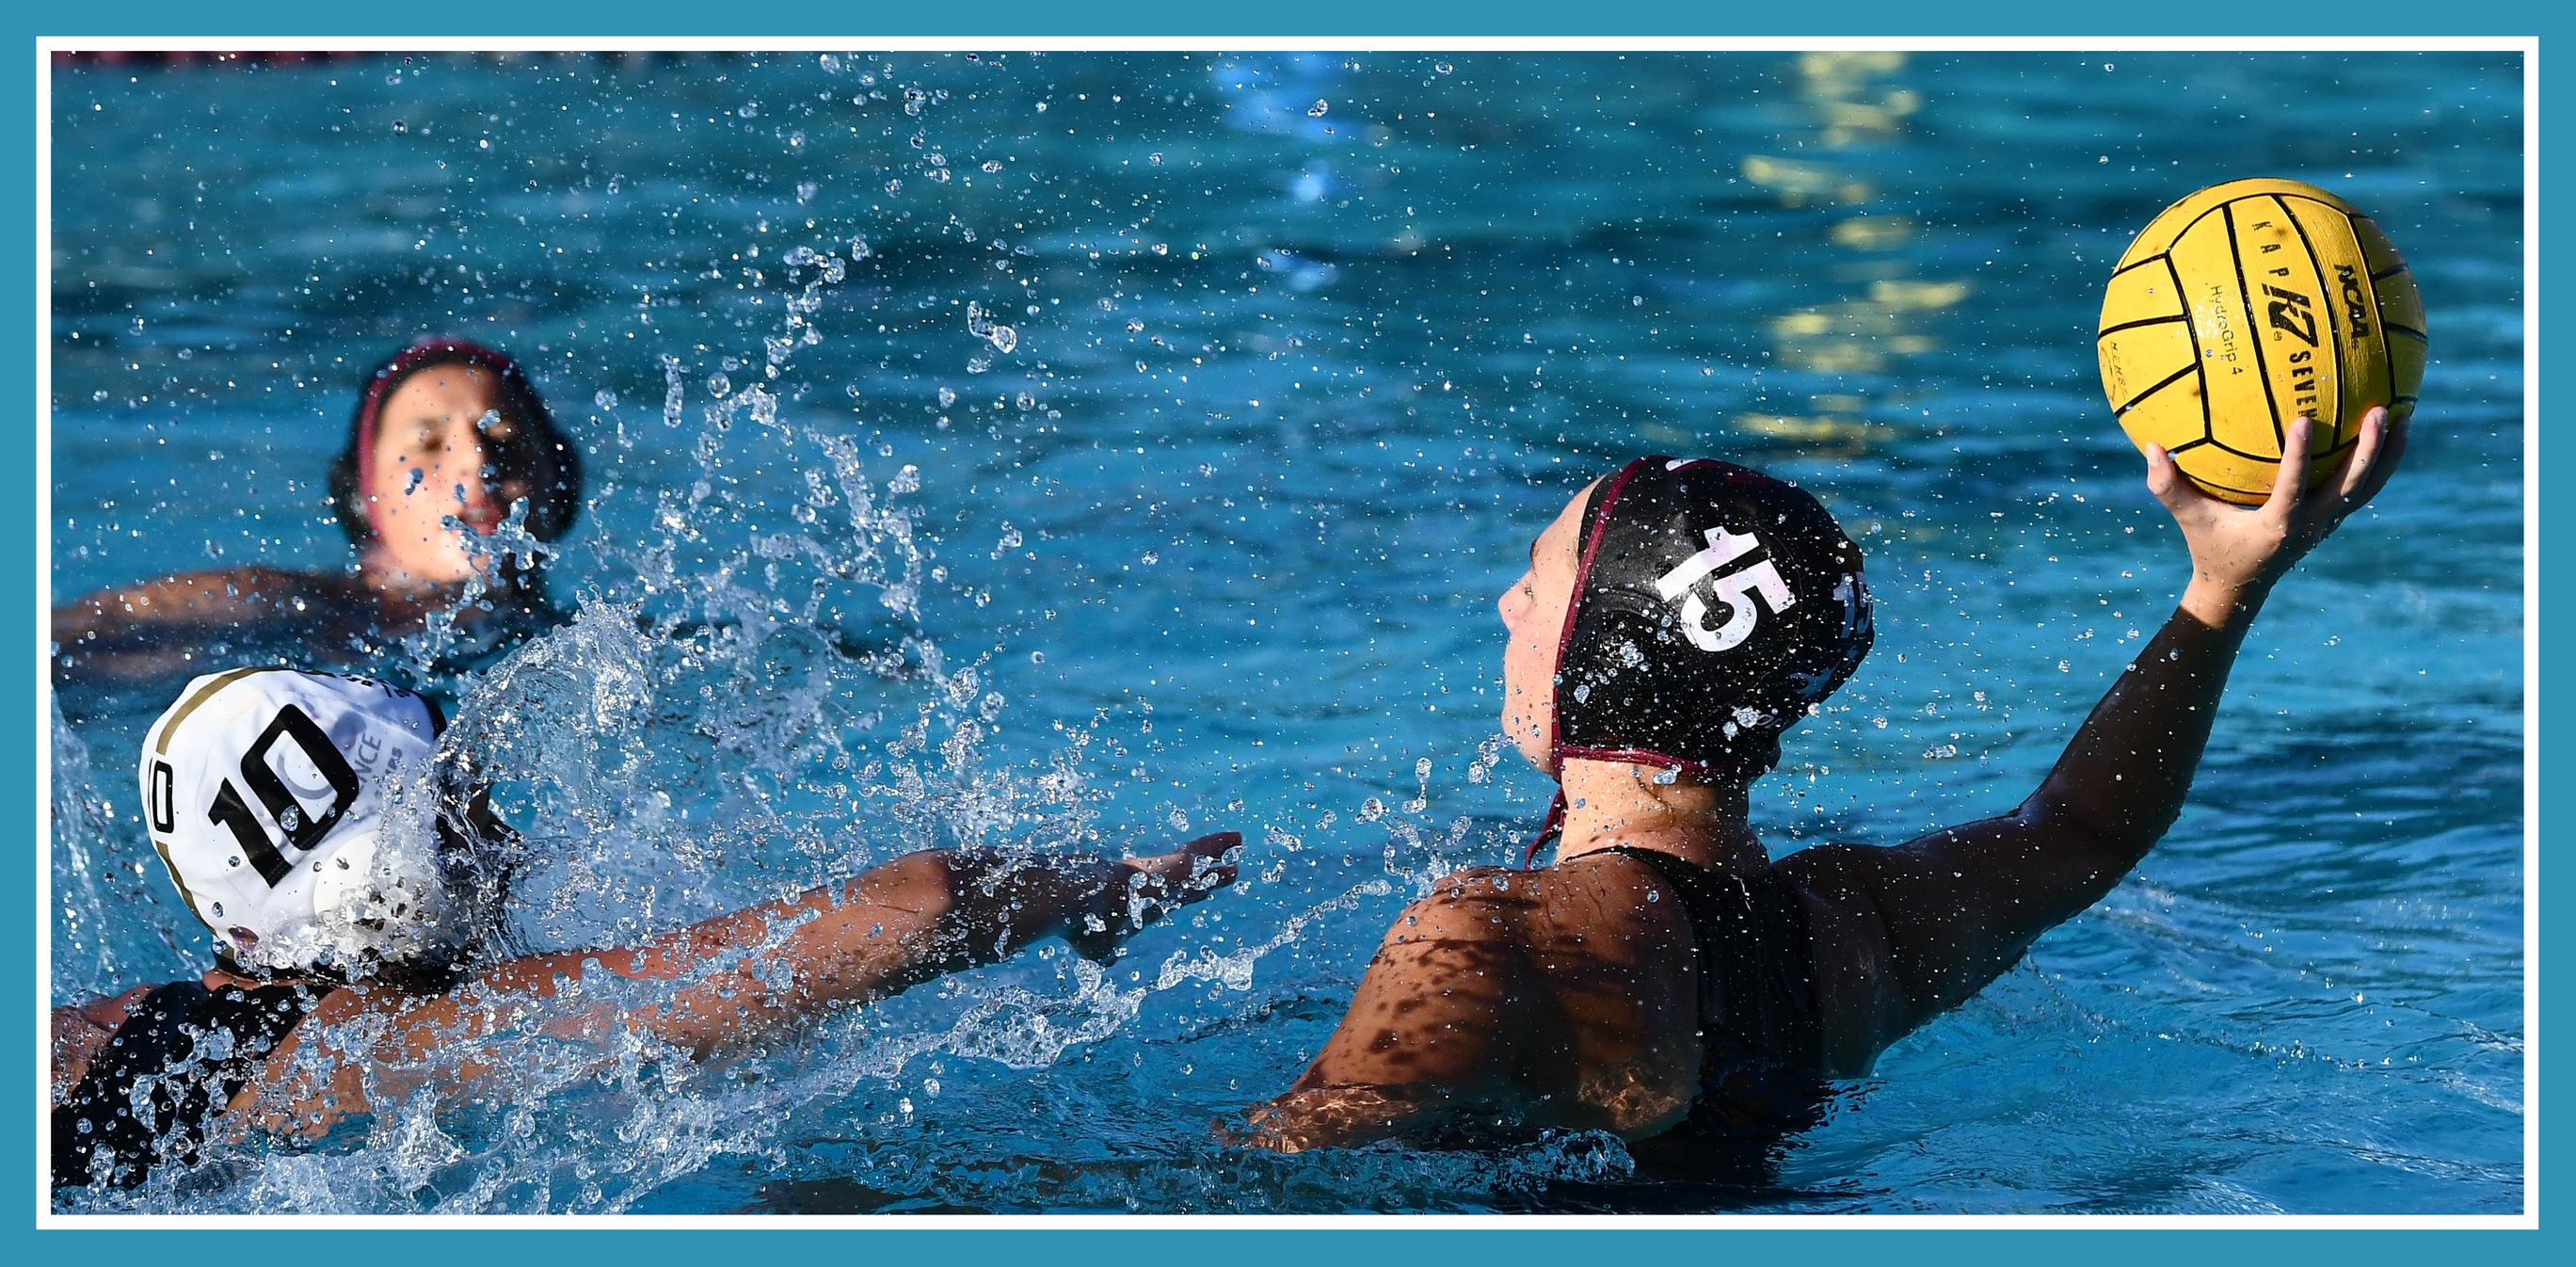 Male waterpolo swimmer passing ball.